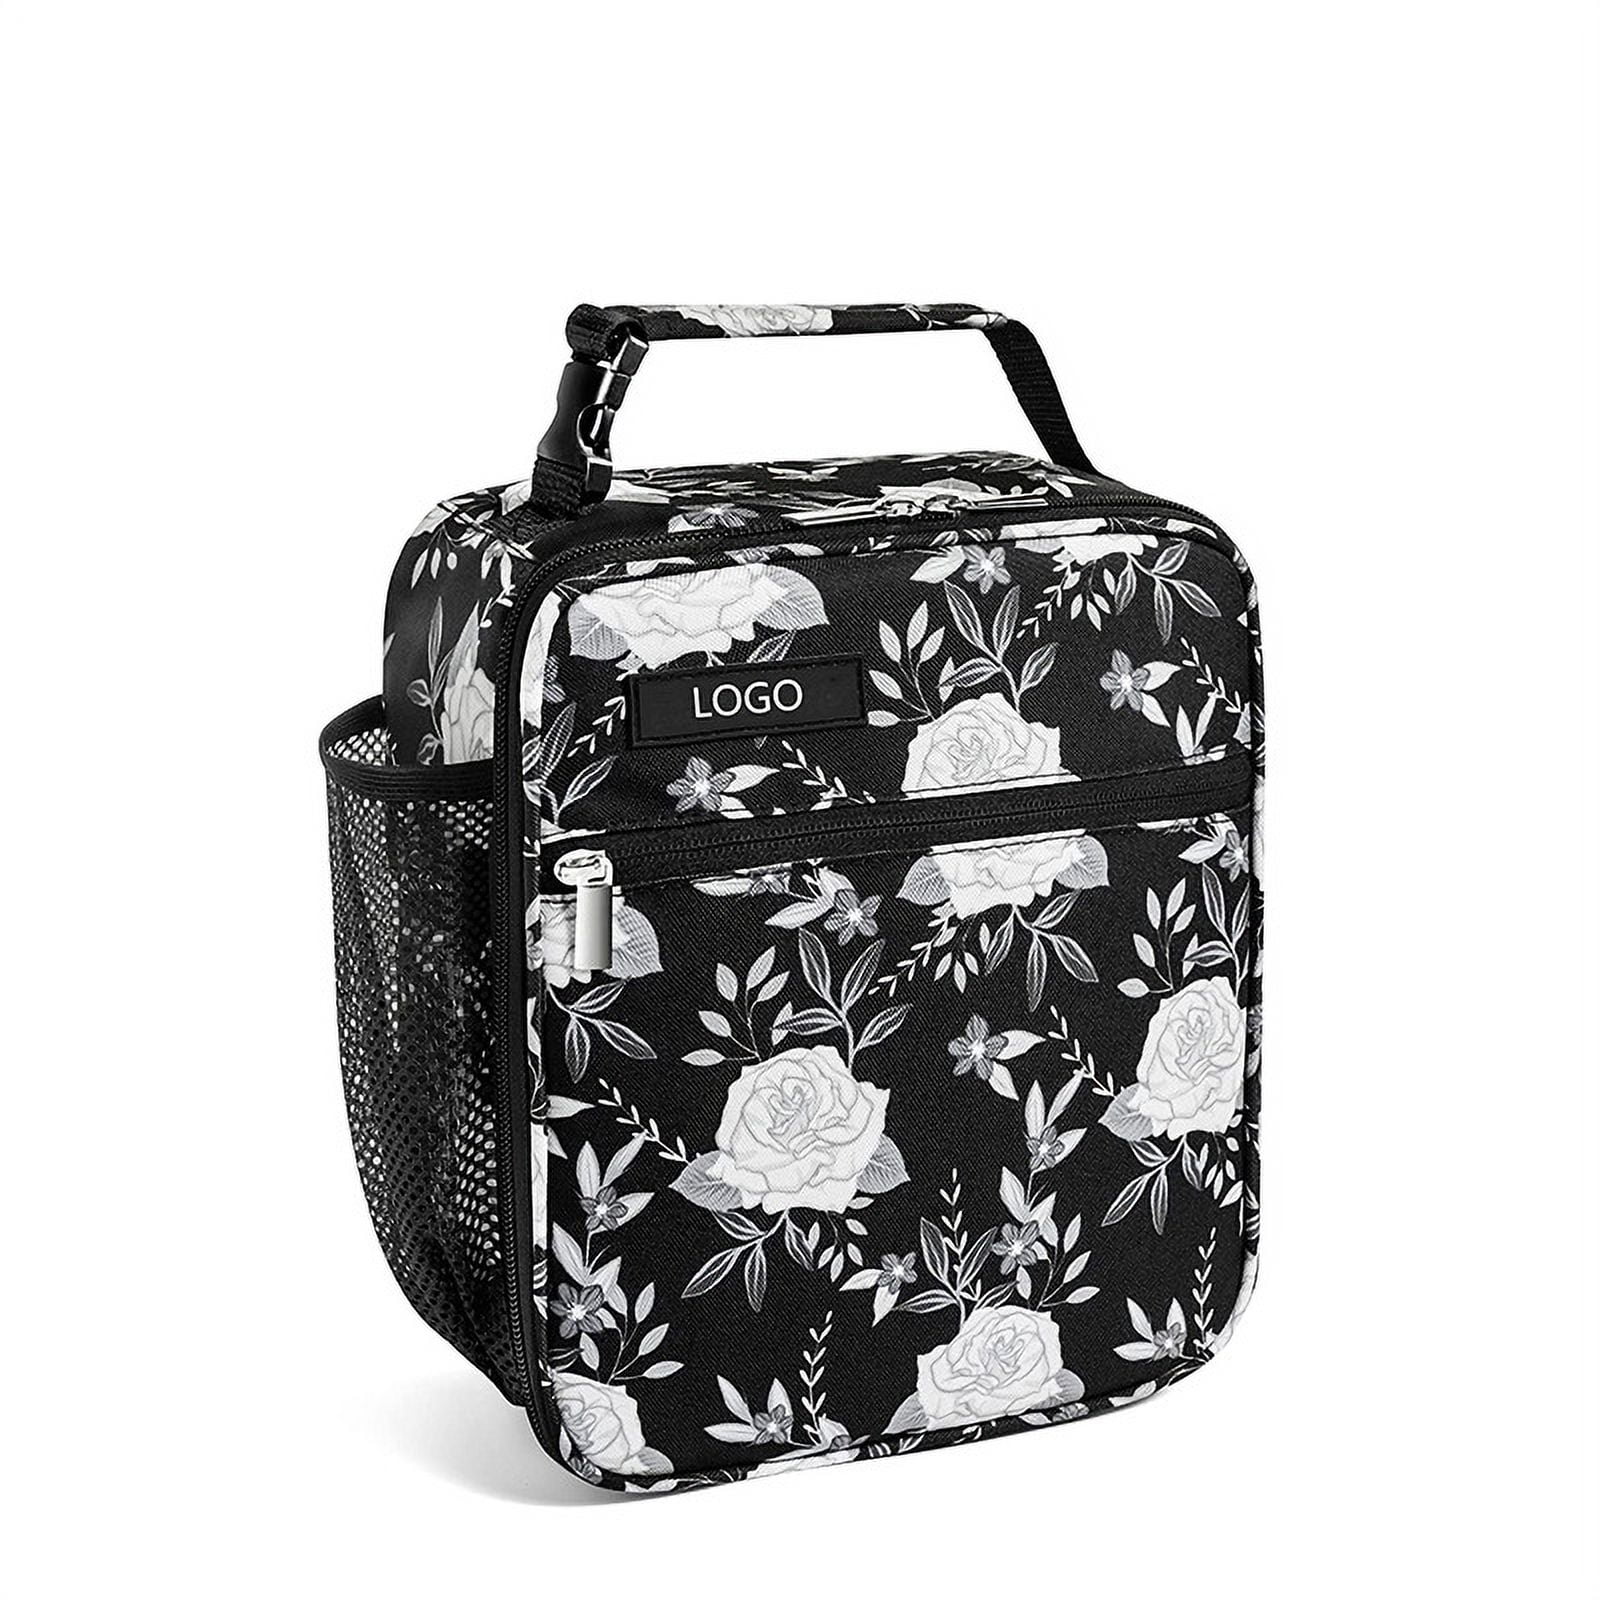 Homgreen Lunch Box Insulated Lunch Bag - Tough & Spacious Adult